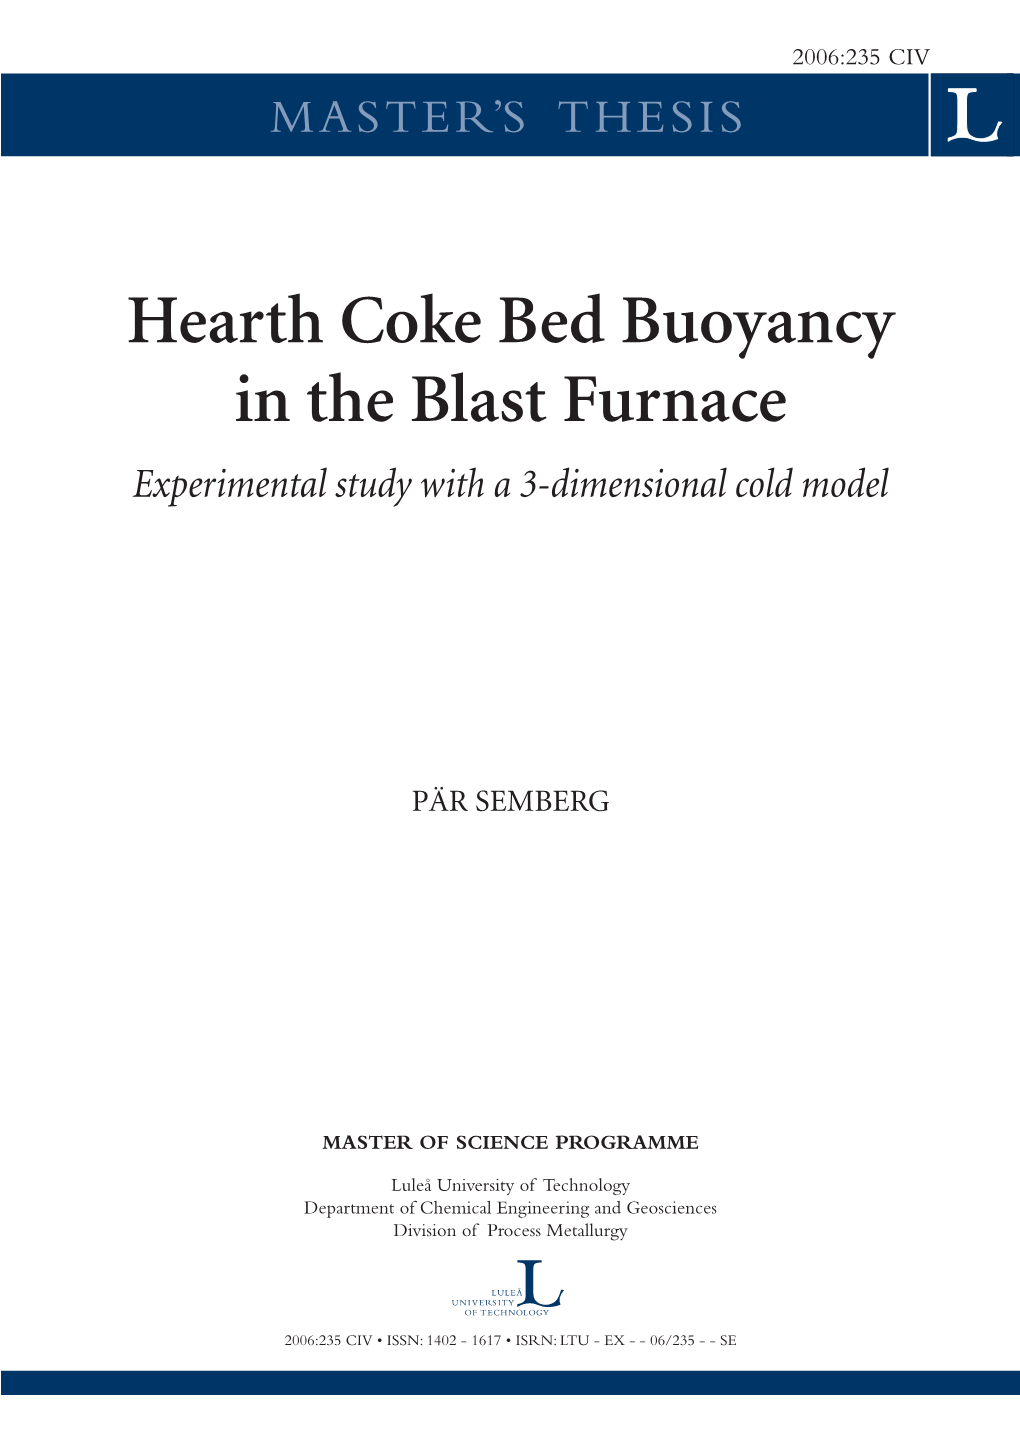 Hearth Coke Bed Buoyancy in the Blast Furnace: Experimental Study with A